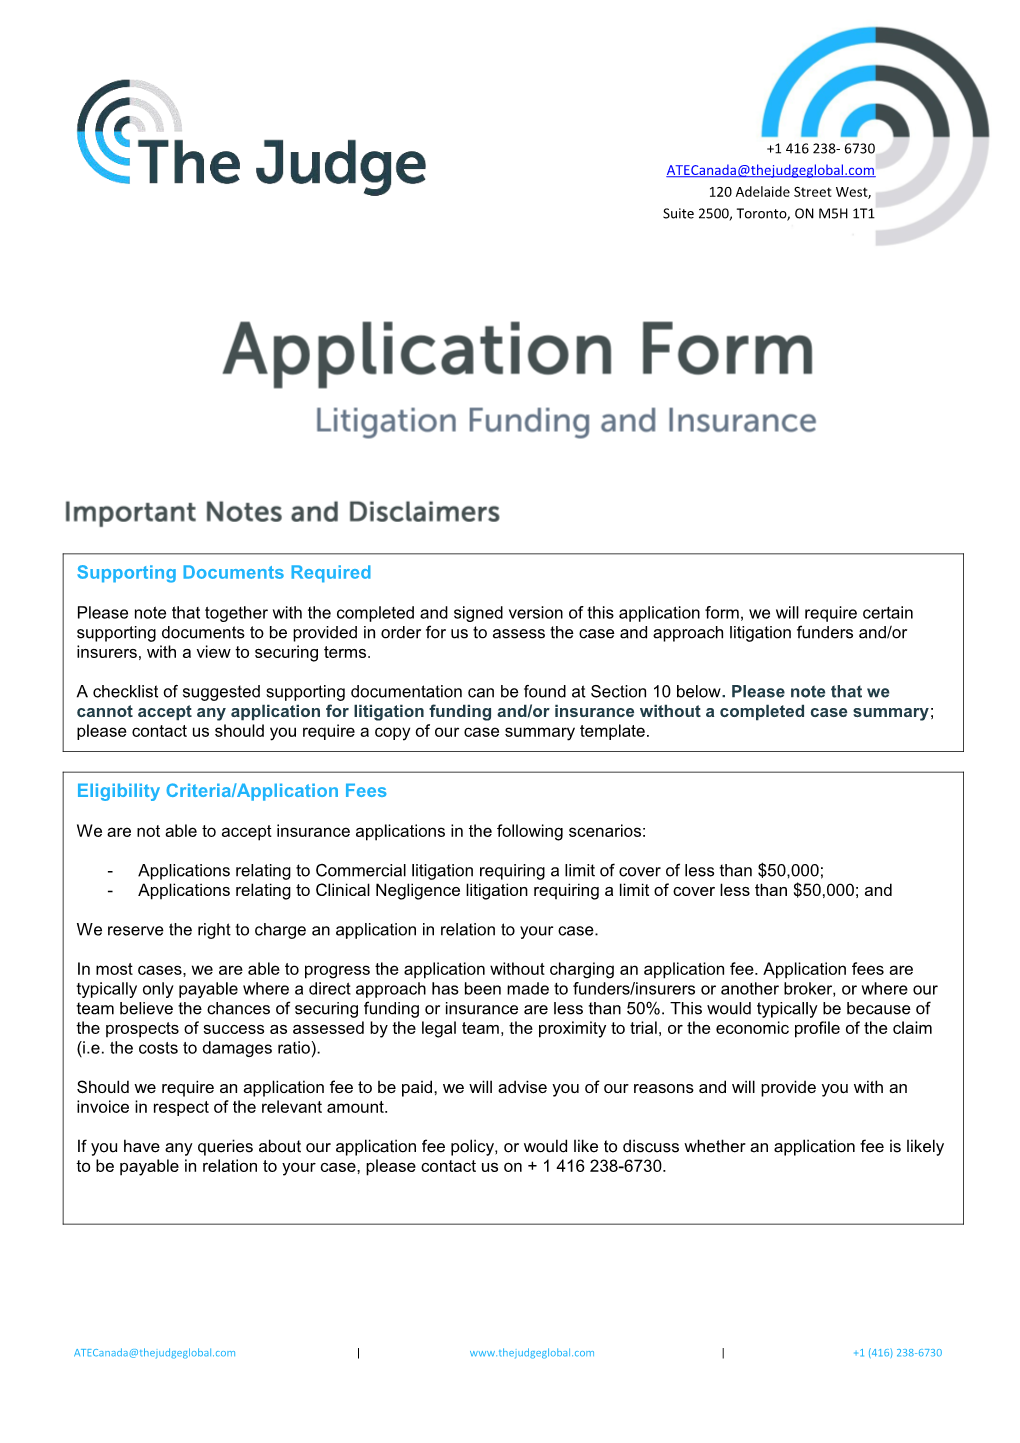 If You Have Any Queries About the Contents of This Proposal Form, Or Wish to Discuss Your